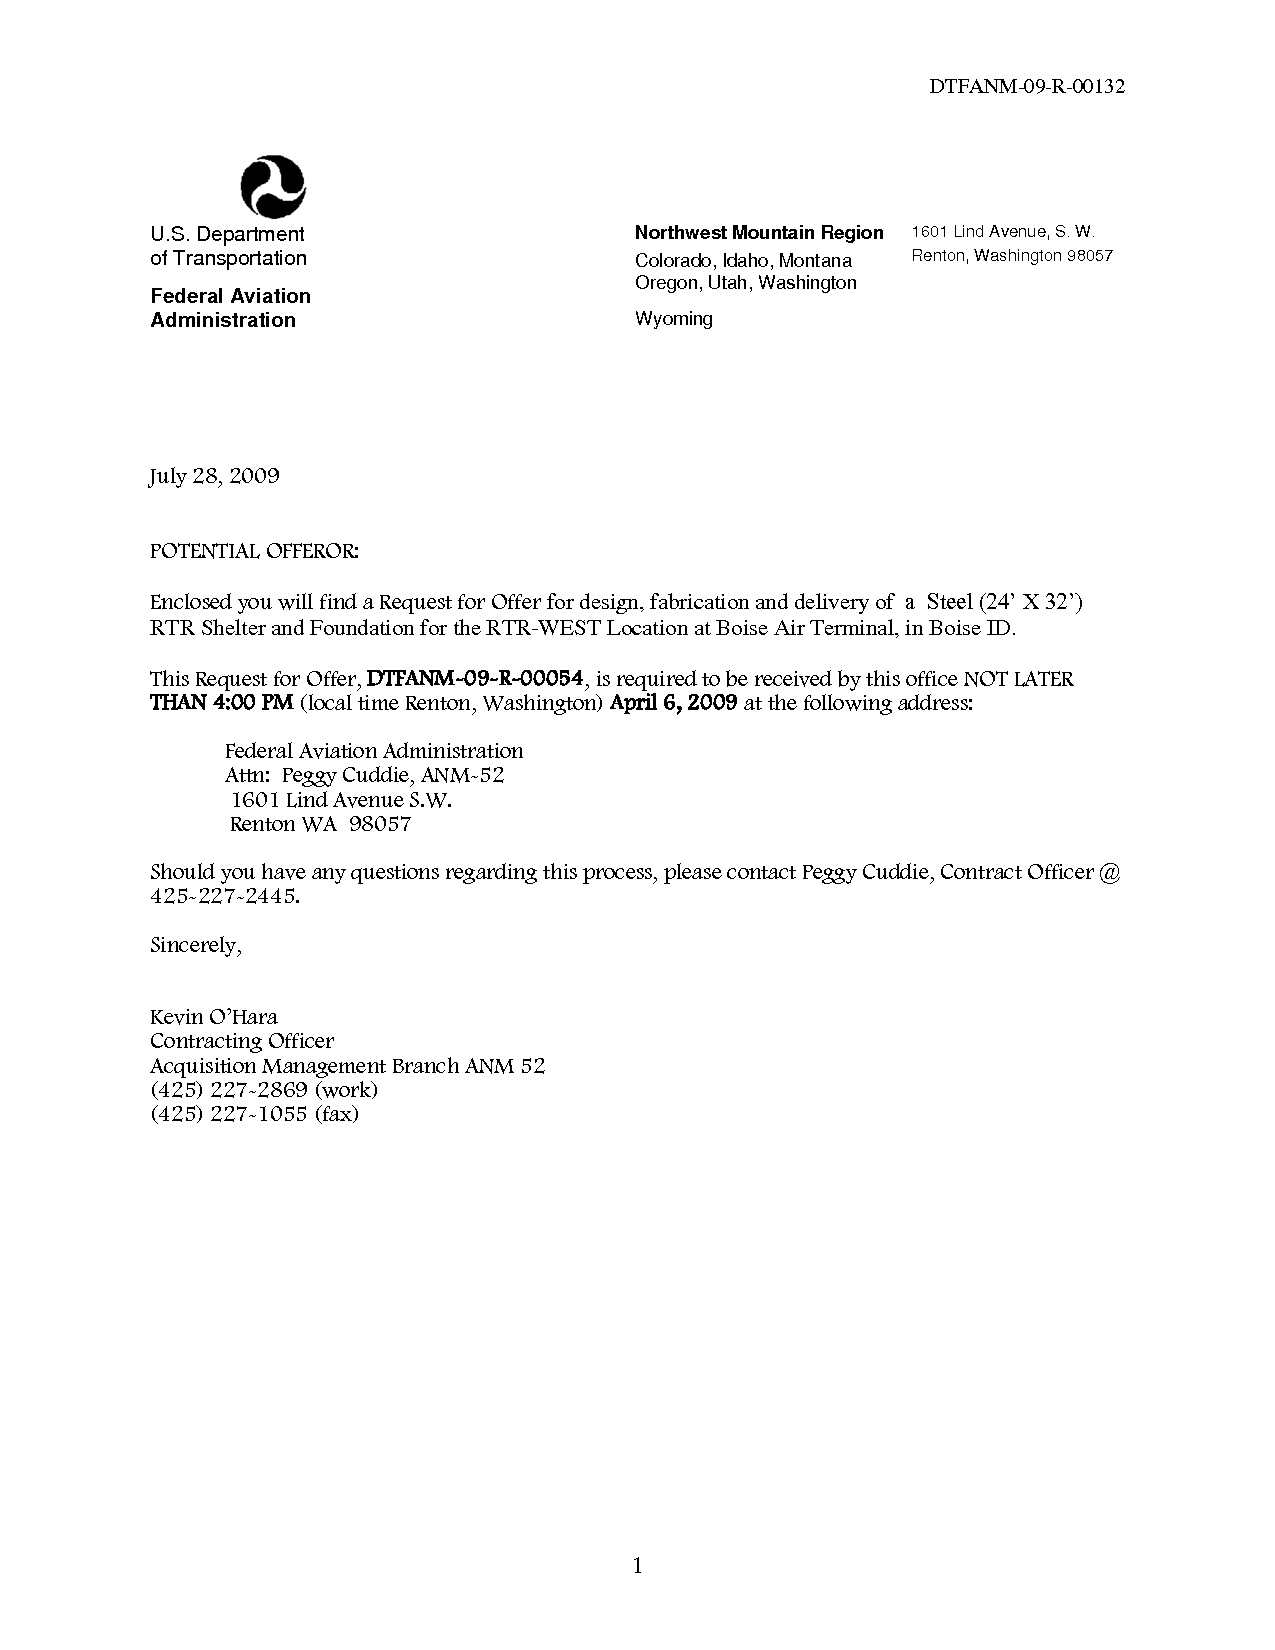 Rental Reference Letter Template - 18 Sample Reference Letter From Employer